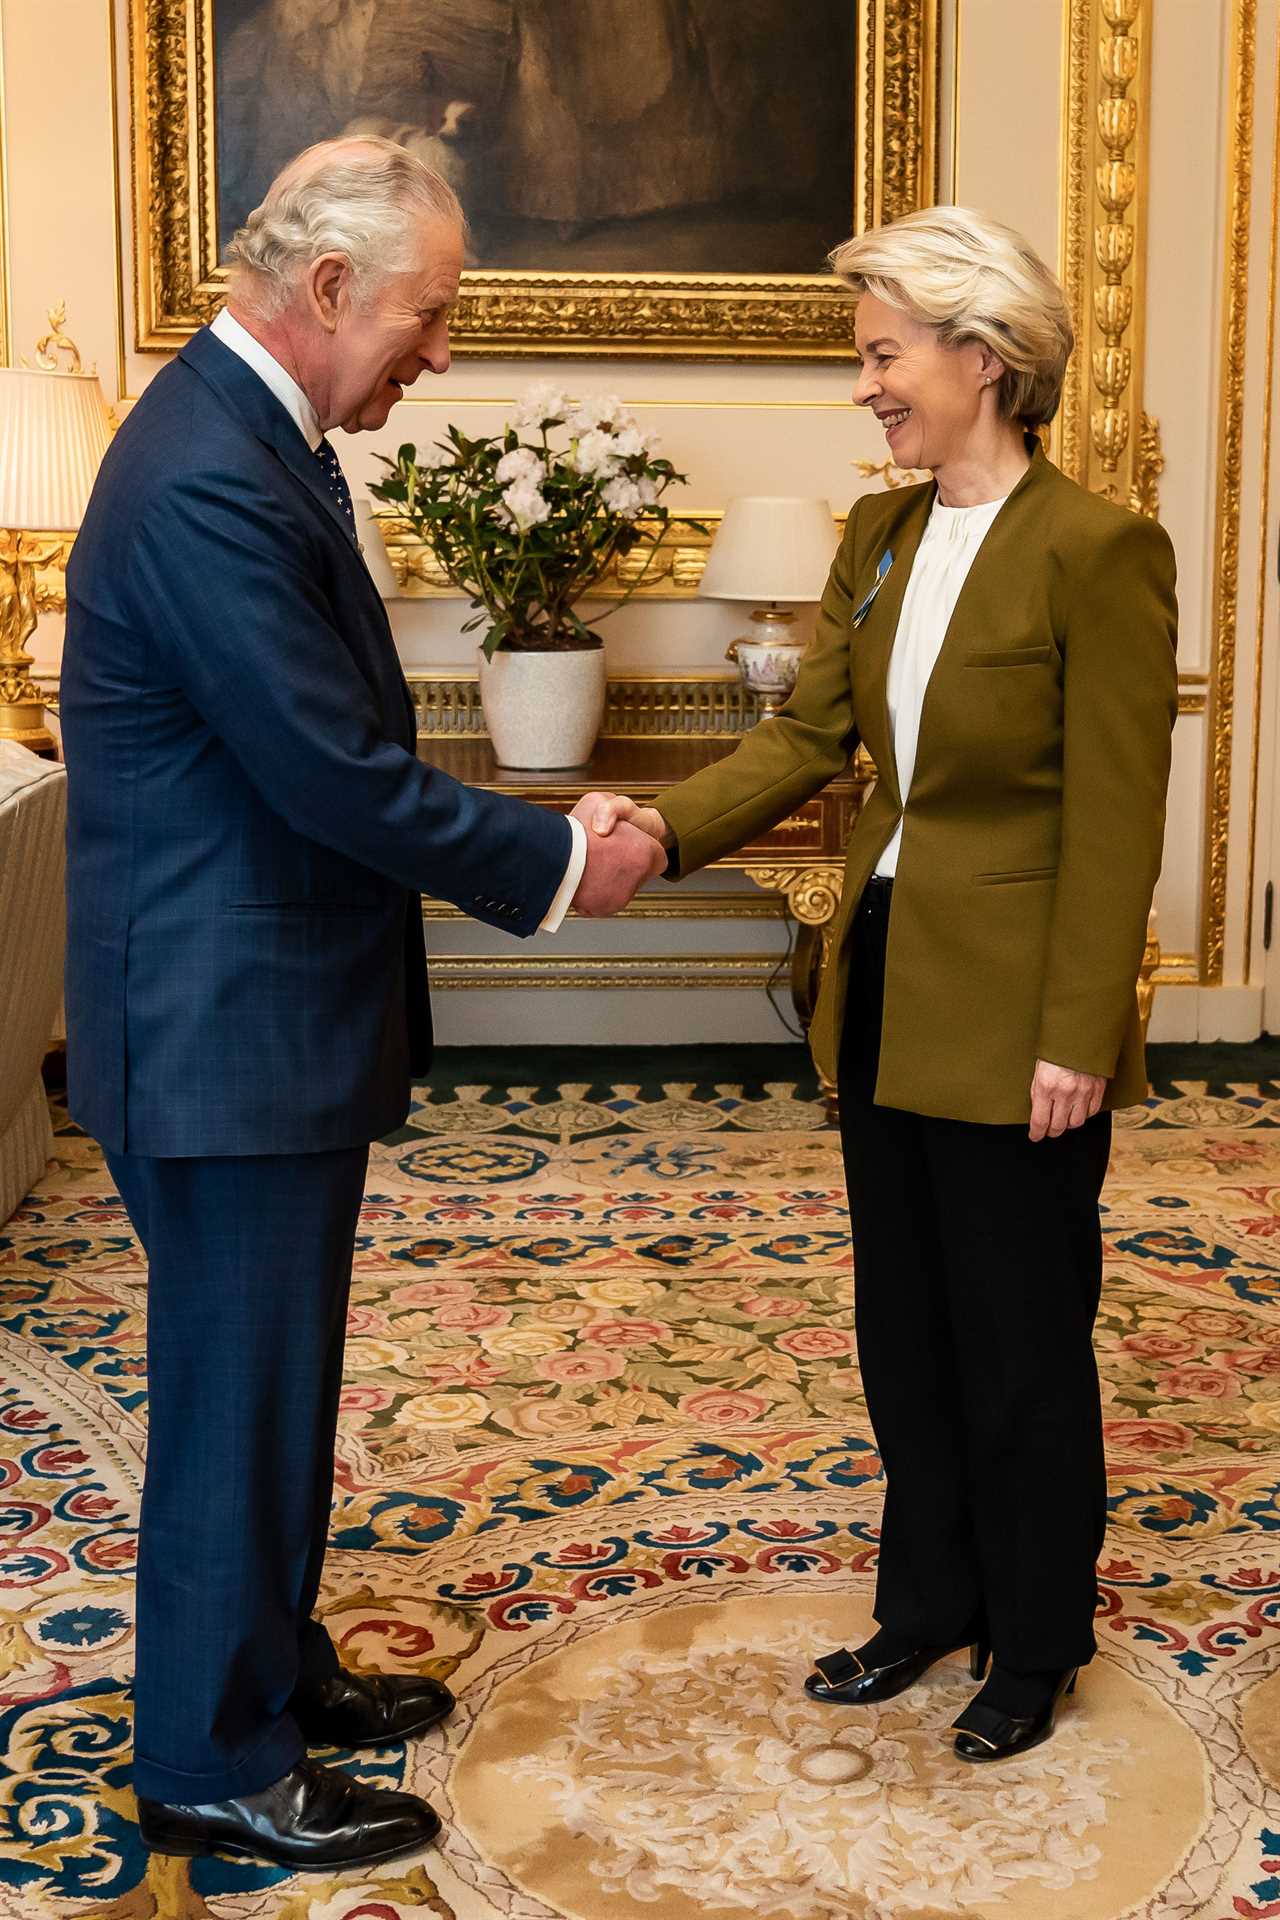 Controversial meeting between the King and Ursula von der Leyen ‘was at her request’